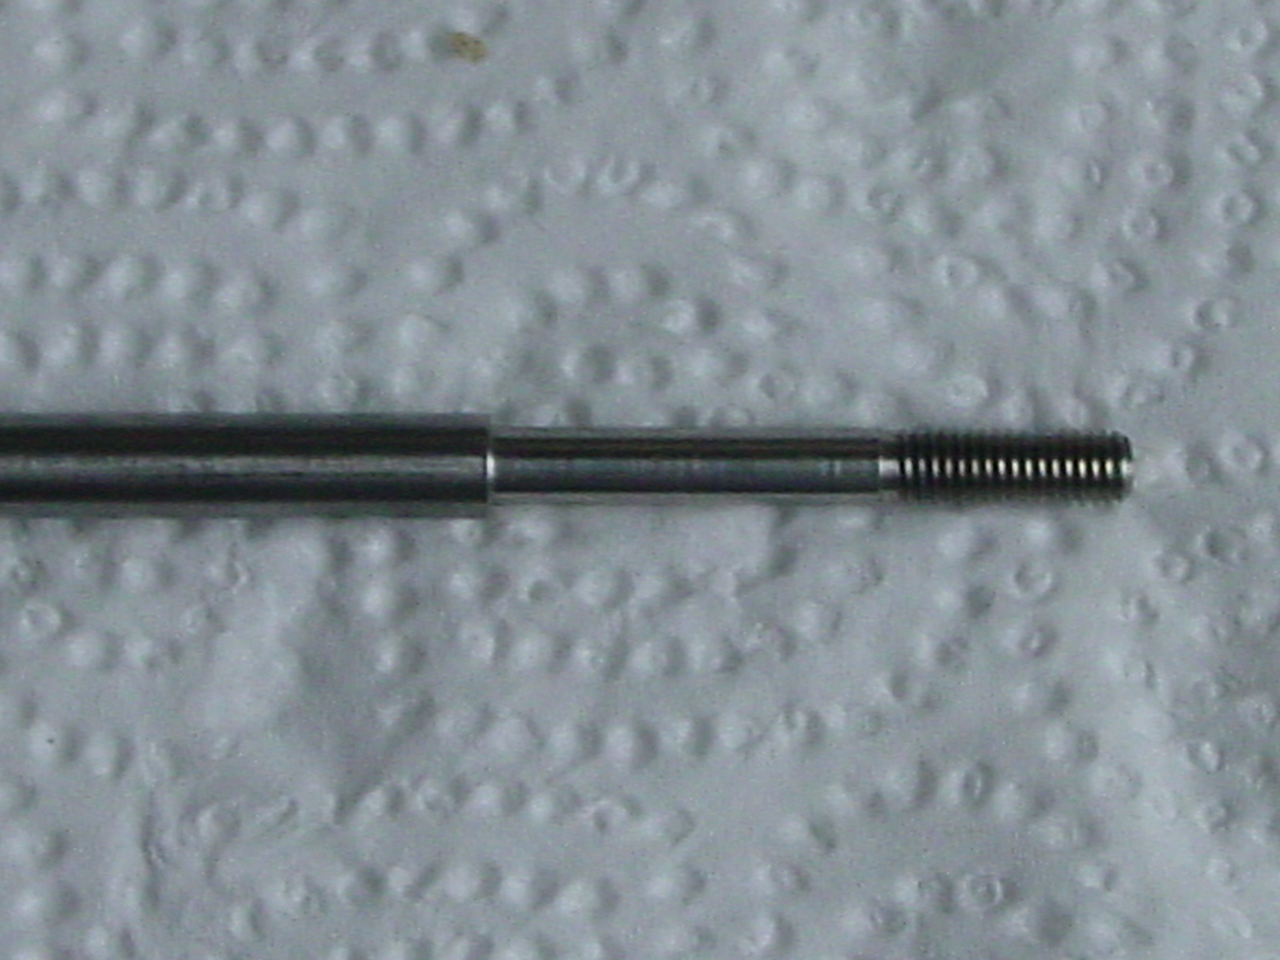 33" 1/4" flexible cable with step 3/16" stub shaft